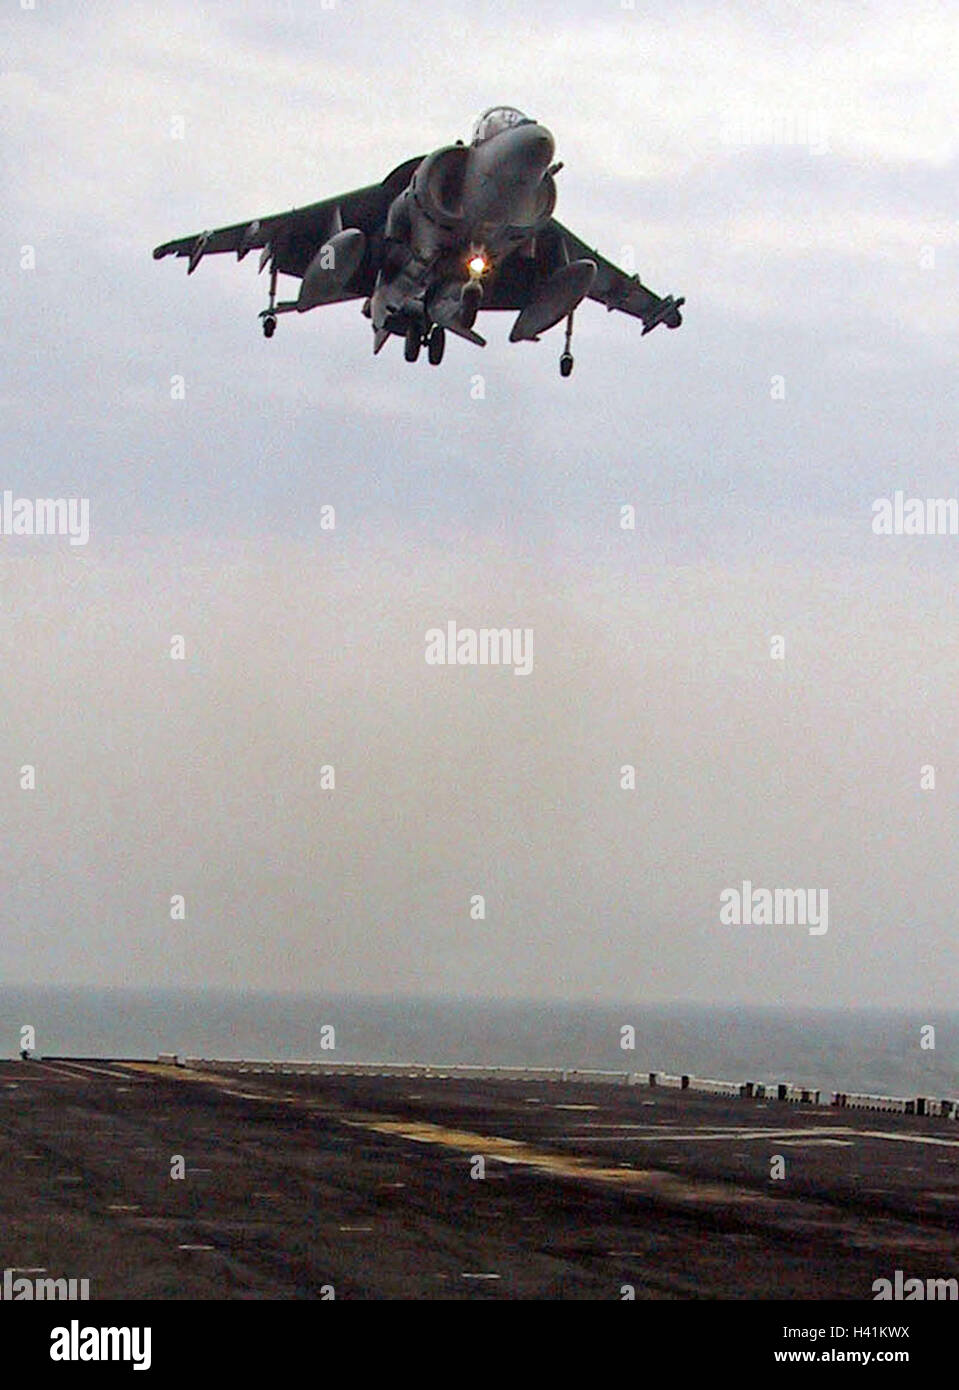 28th January 2003 Operation Enduring Freedom: a U.S. Marines Harrier jump jet hovers above the USS Nassau, in the Persian Gulf. Stock Photo